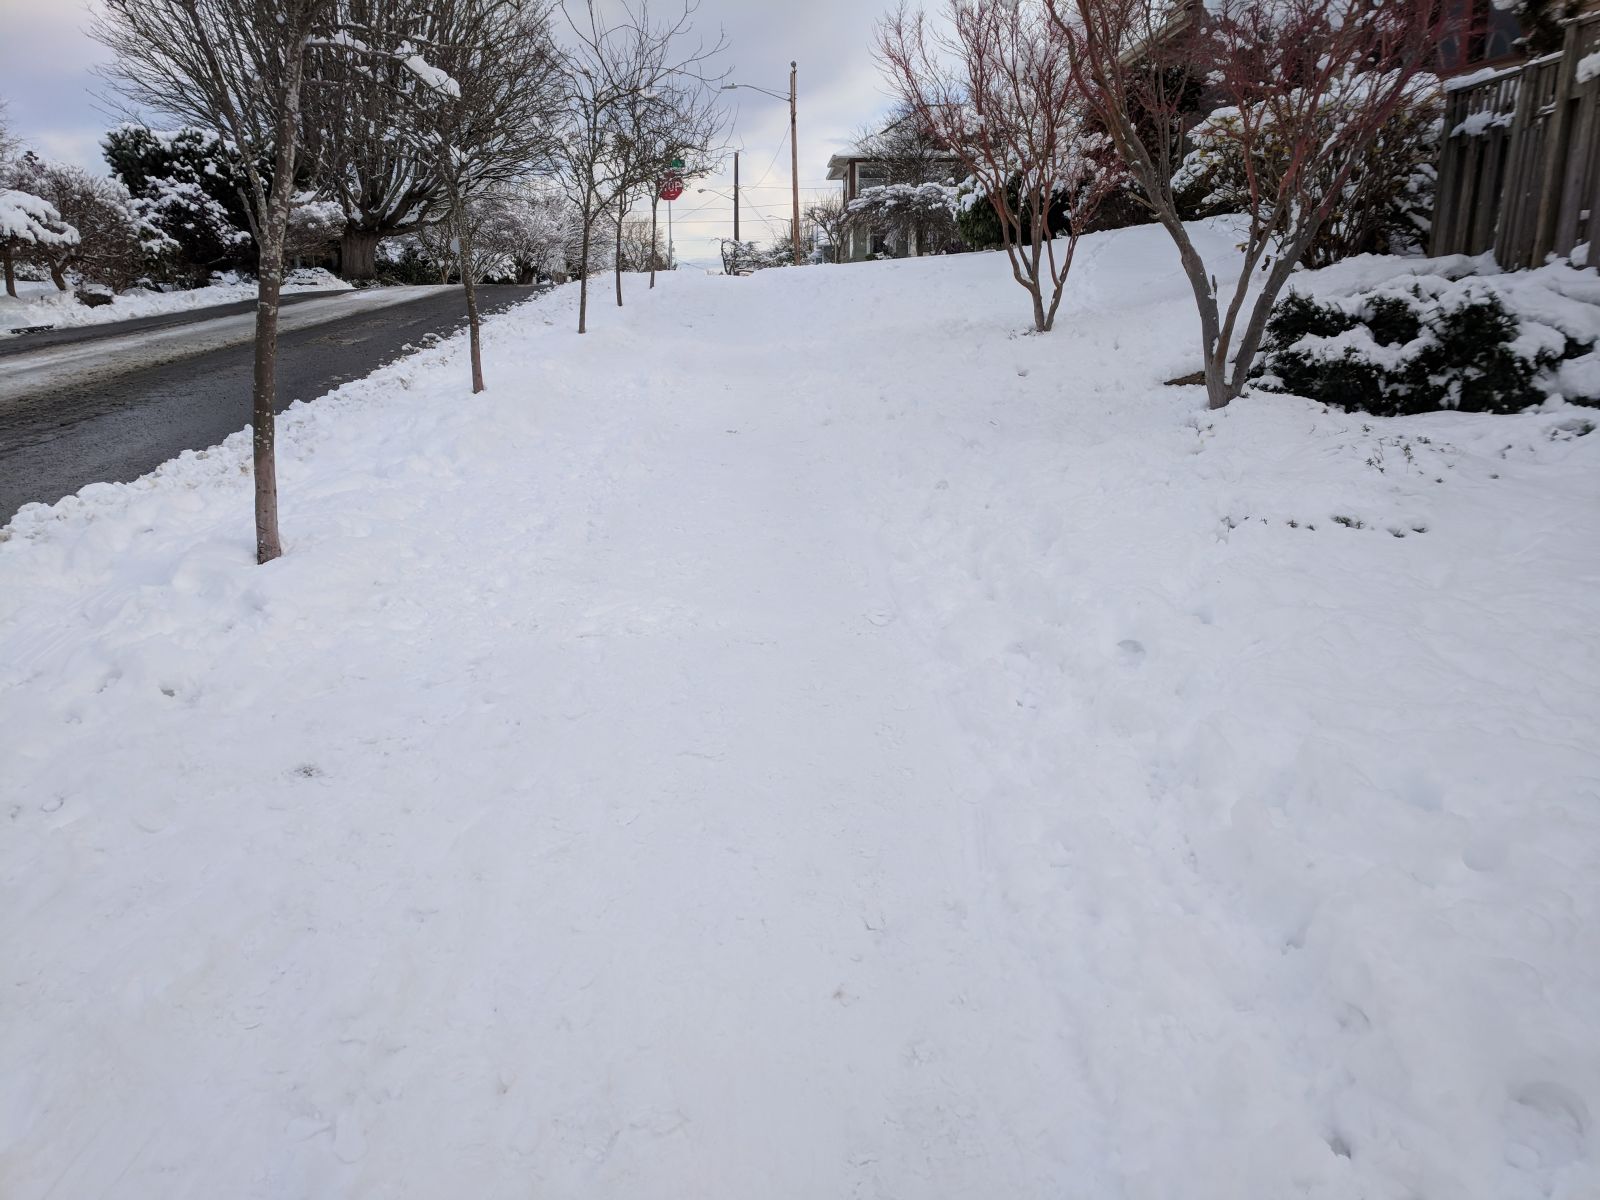 This one block inexplicably plowed but nothing else was... Also super-hidden sidewalk!